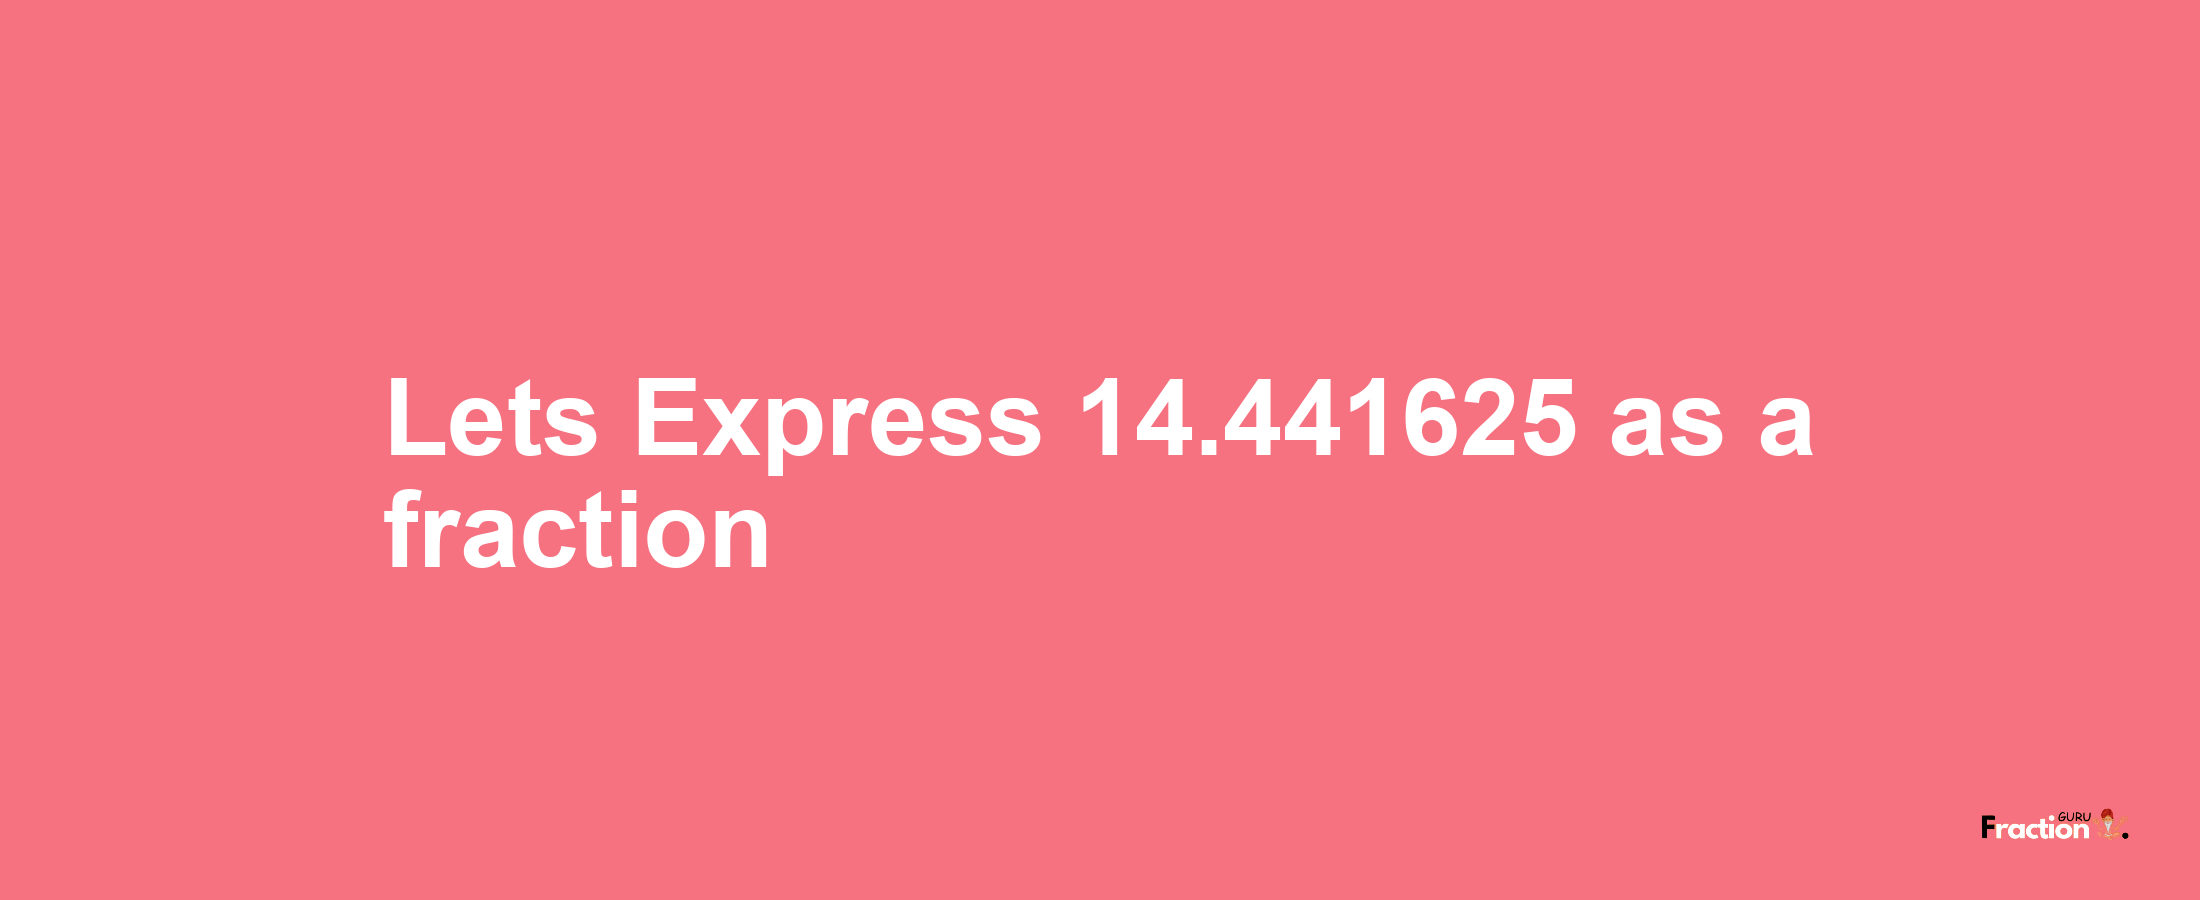 Lets Express 14.441625 as afraction